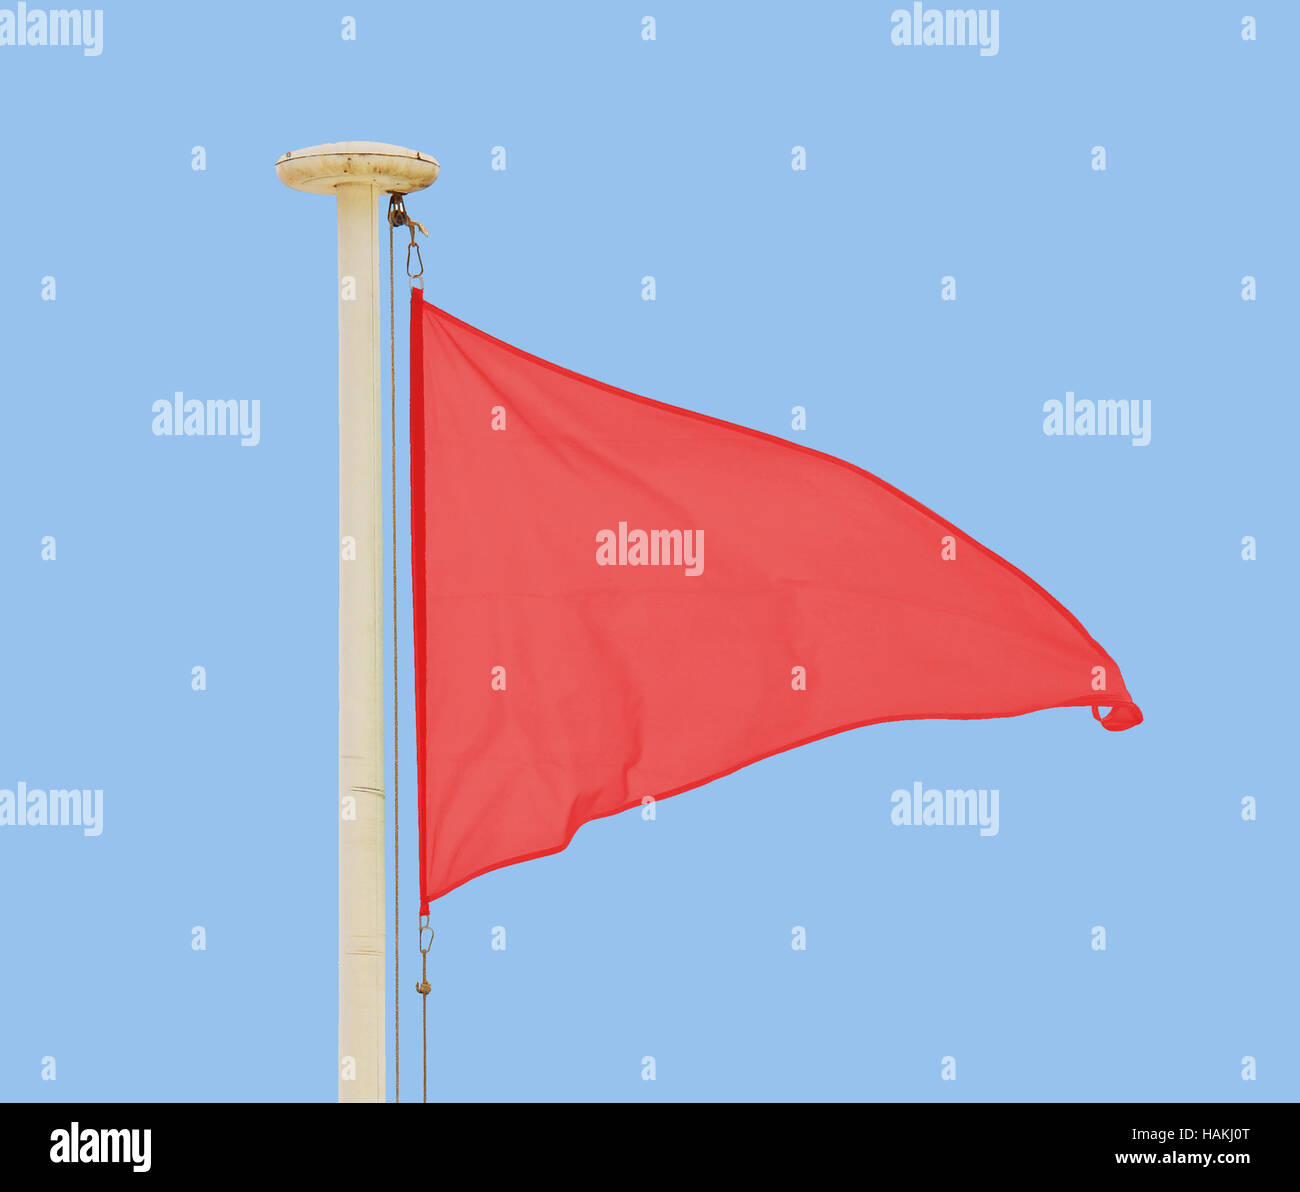 Red pennant flying in a brisk breeze against a pale blue sky Stock Photo